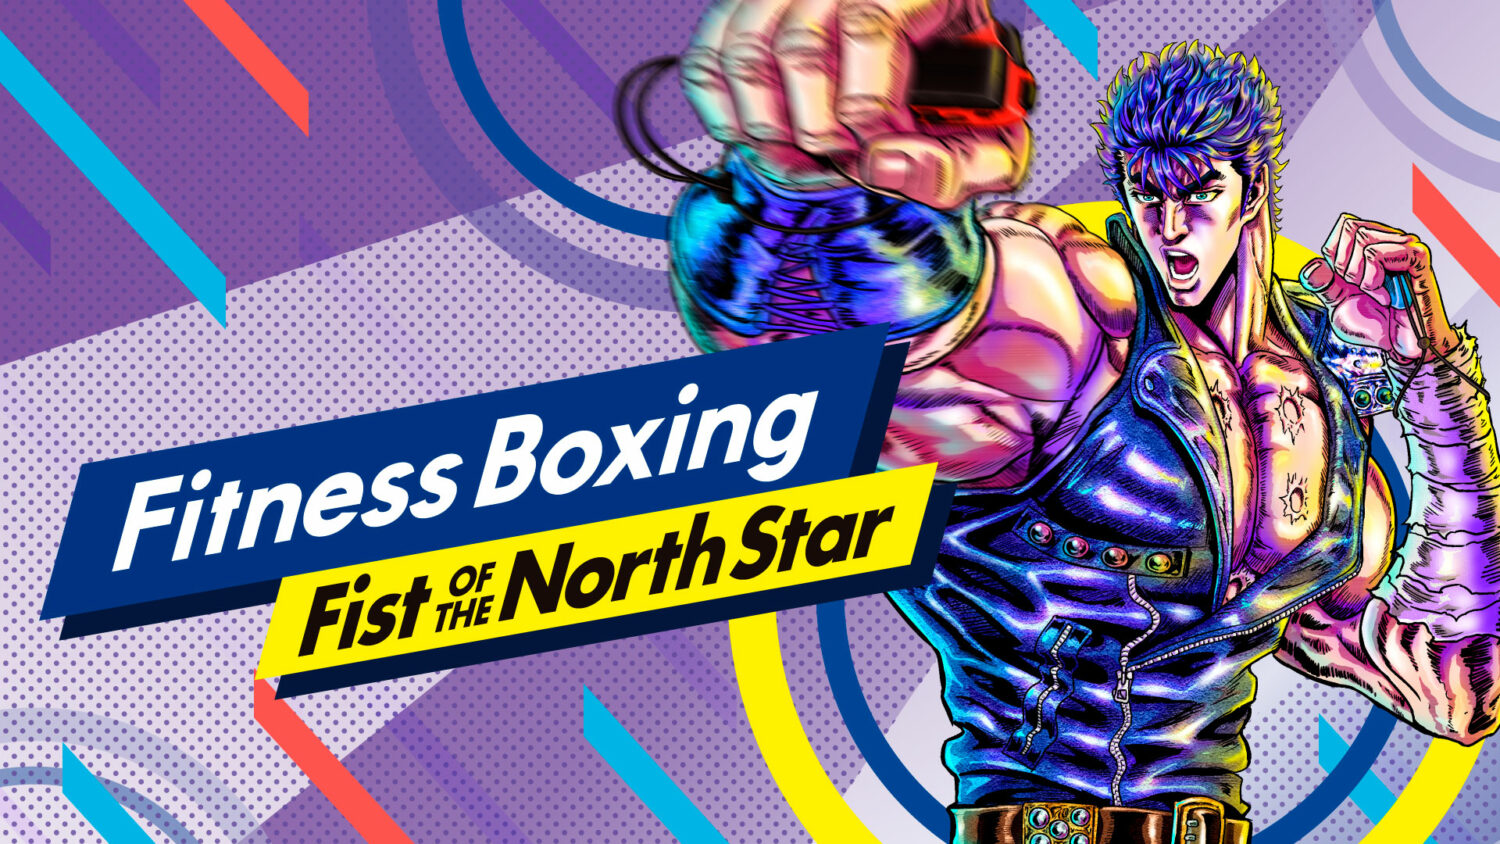 Fitness Boxing Fist of the North Star - Nintendo Switch eShop